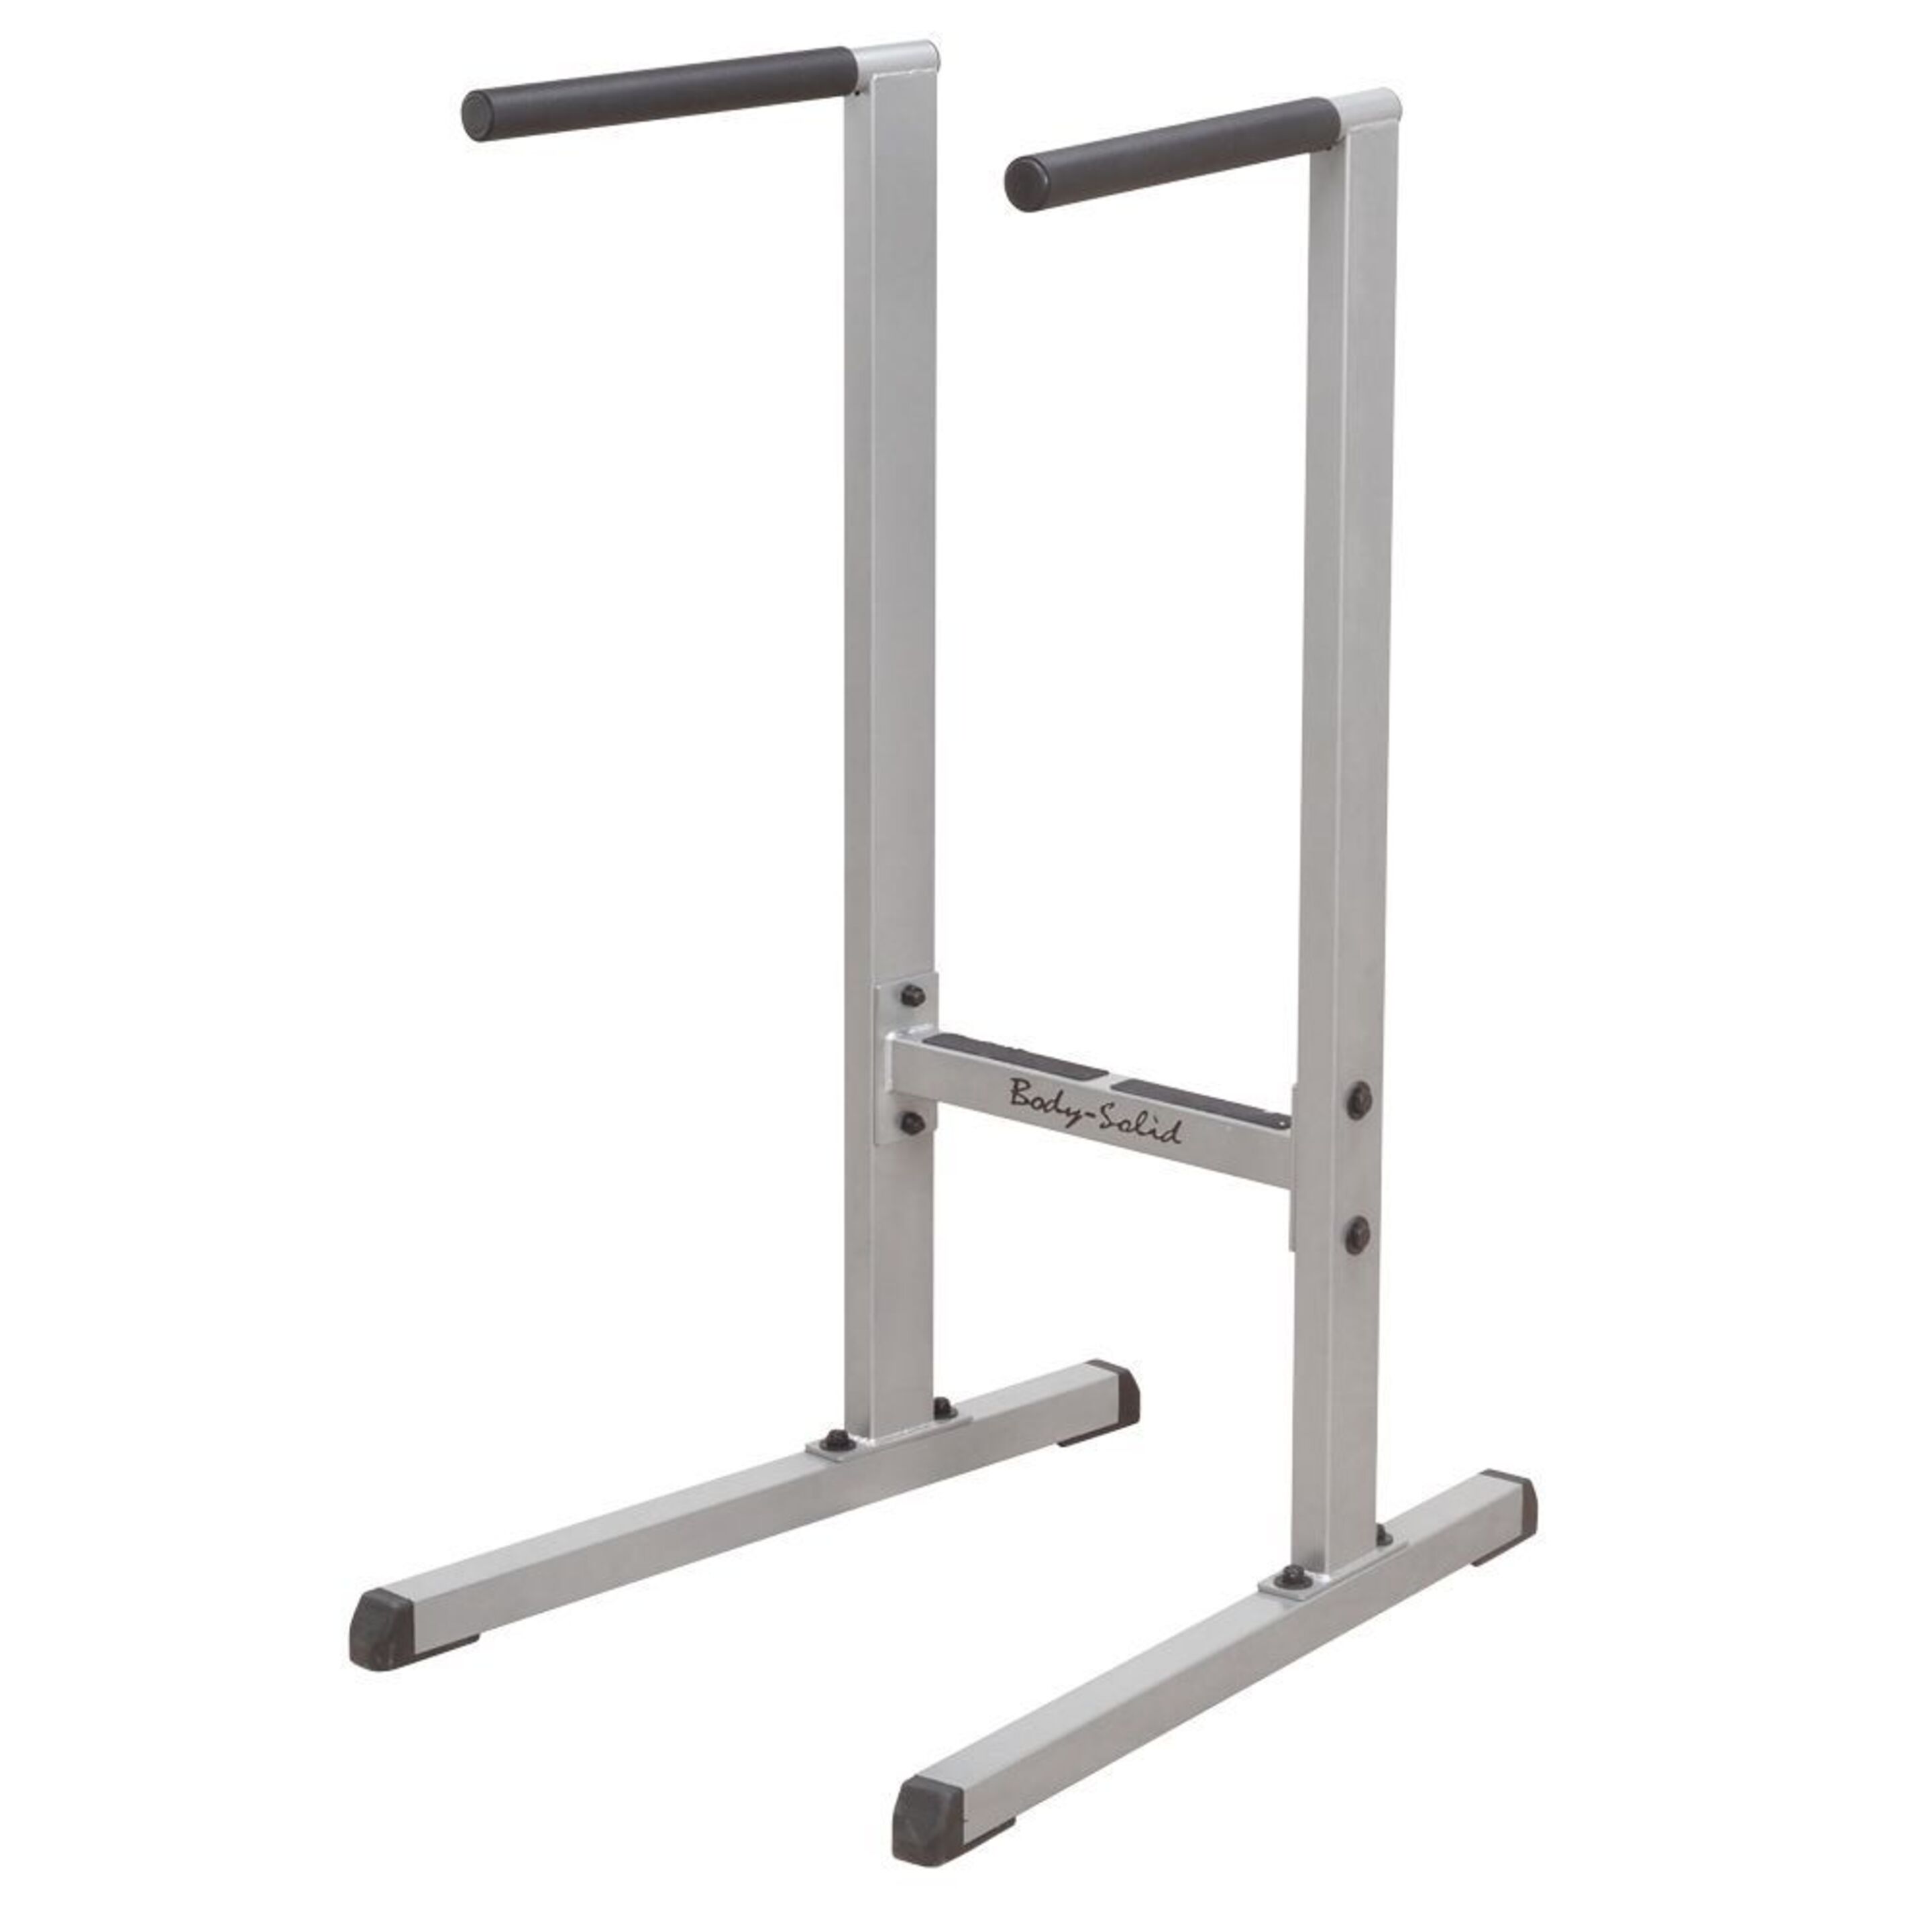 Dip Station Body-solid  Gdip59 - Gris - Musculacion  MKP